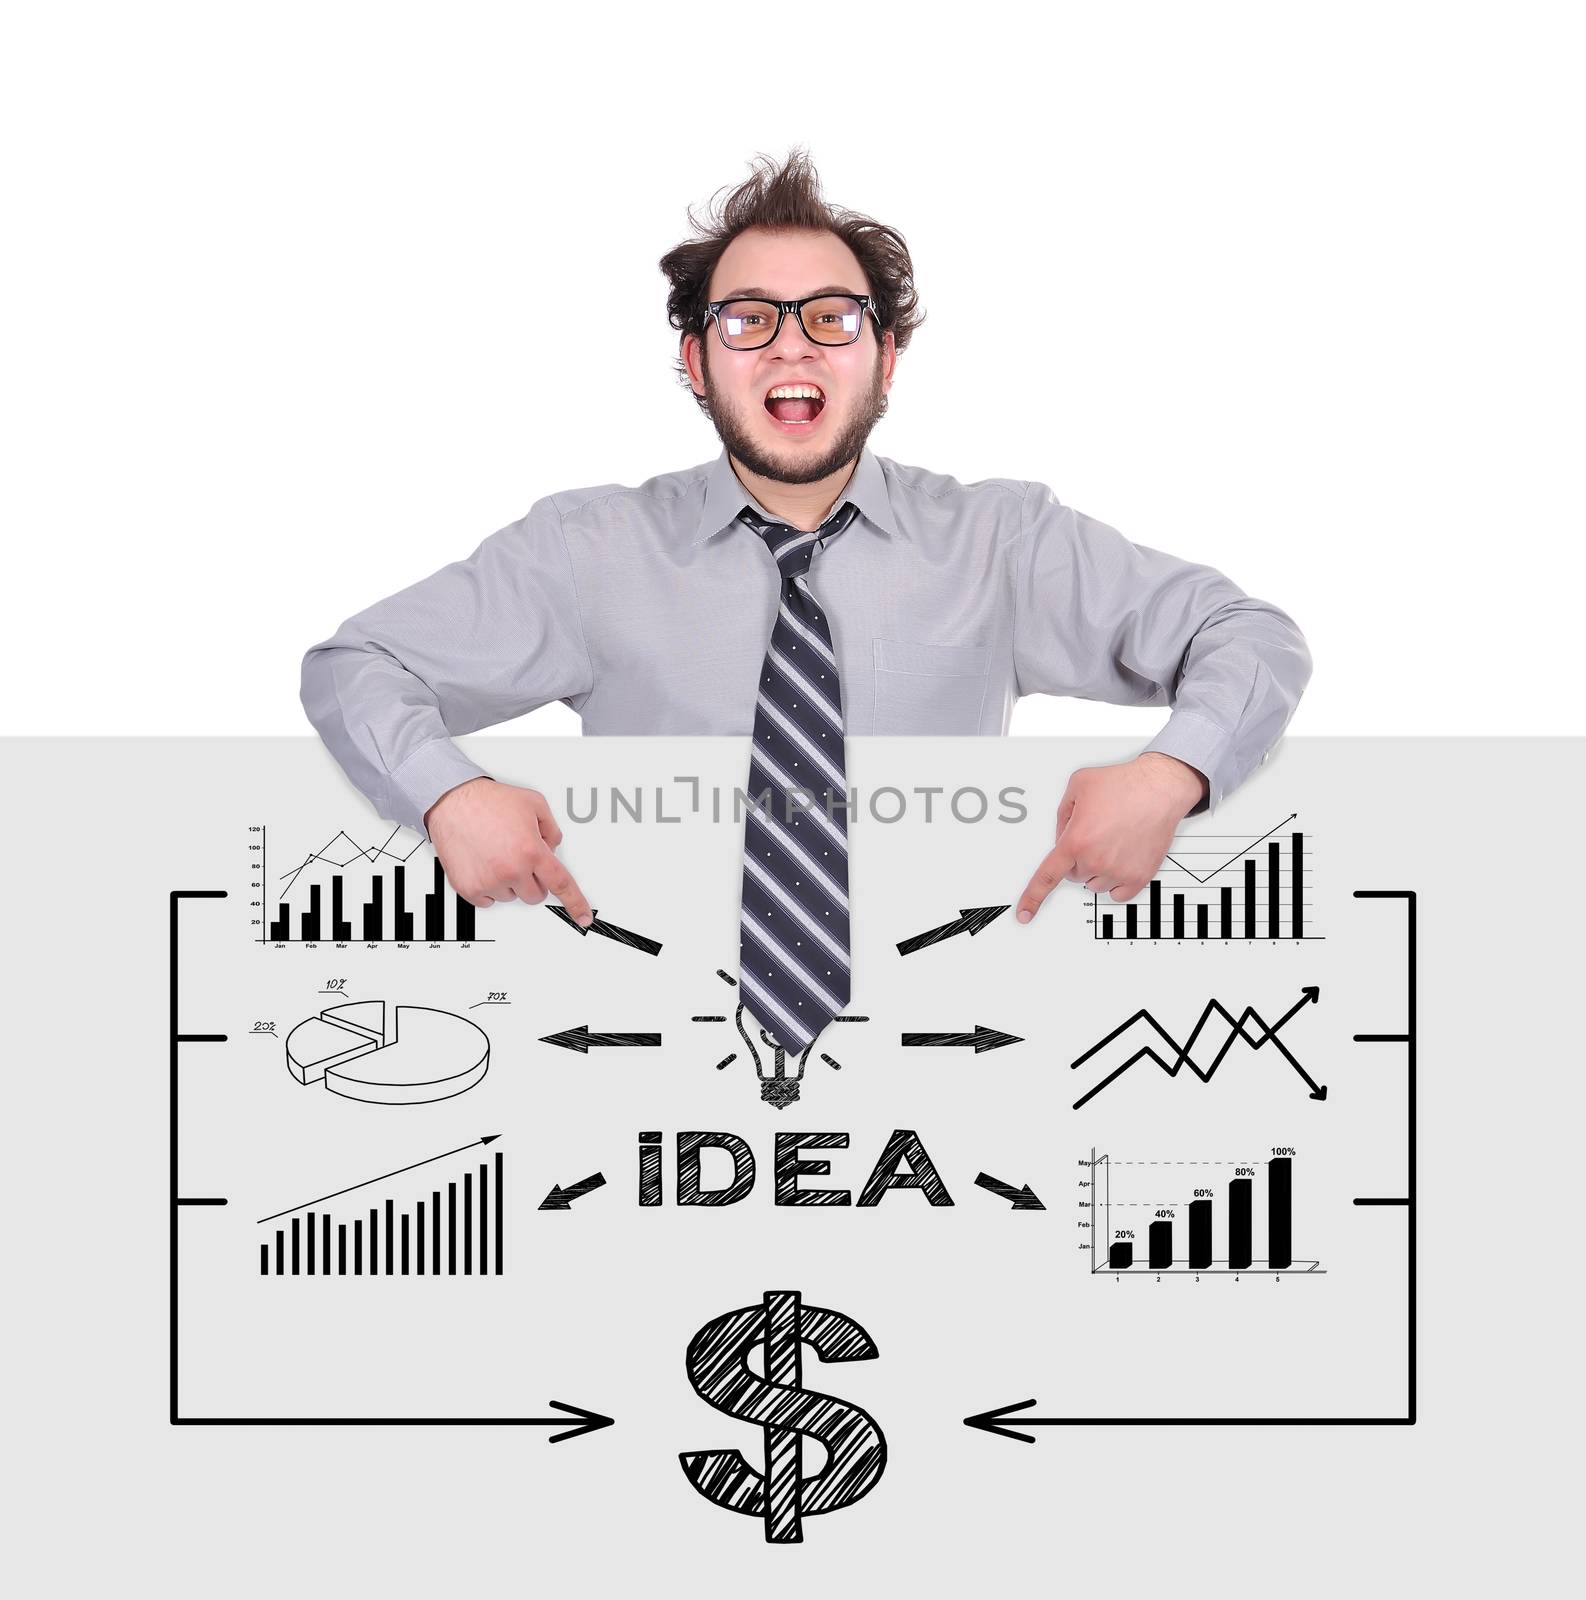 happy businessman pointing to poster with idea concept